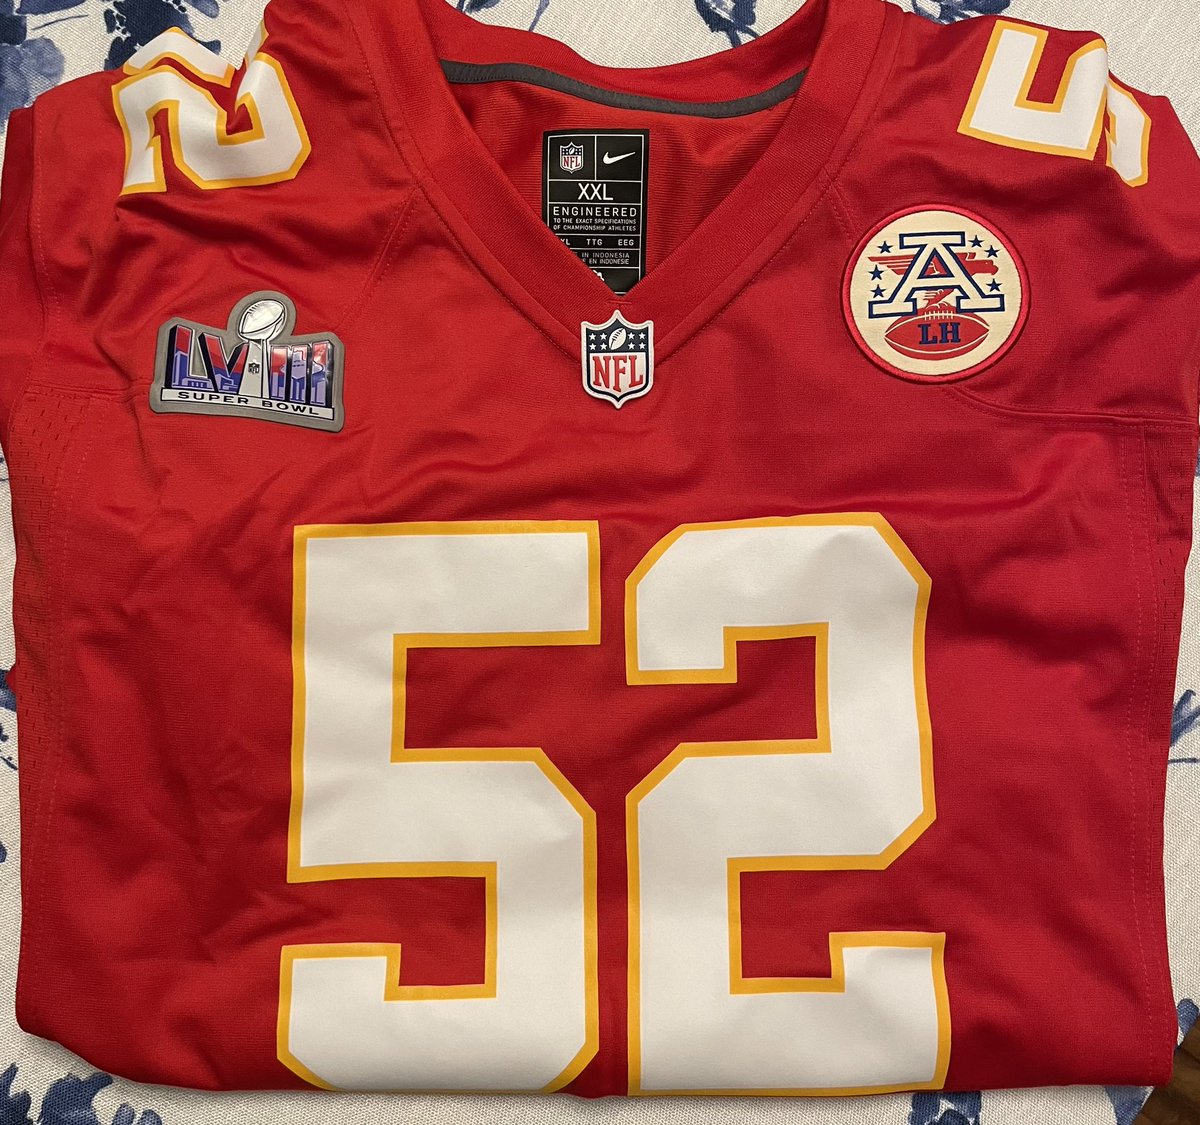 Finally my @Chiefs Super Bowl jersey arrived! This year, I picked @creed_humphrey as I’ve been watching him since he started at OU and came to KC. Great day!